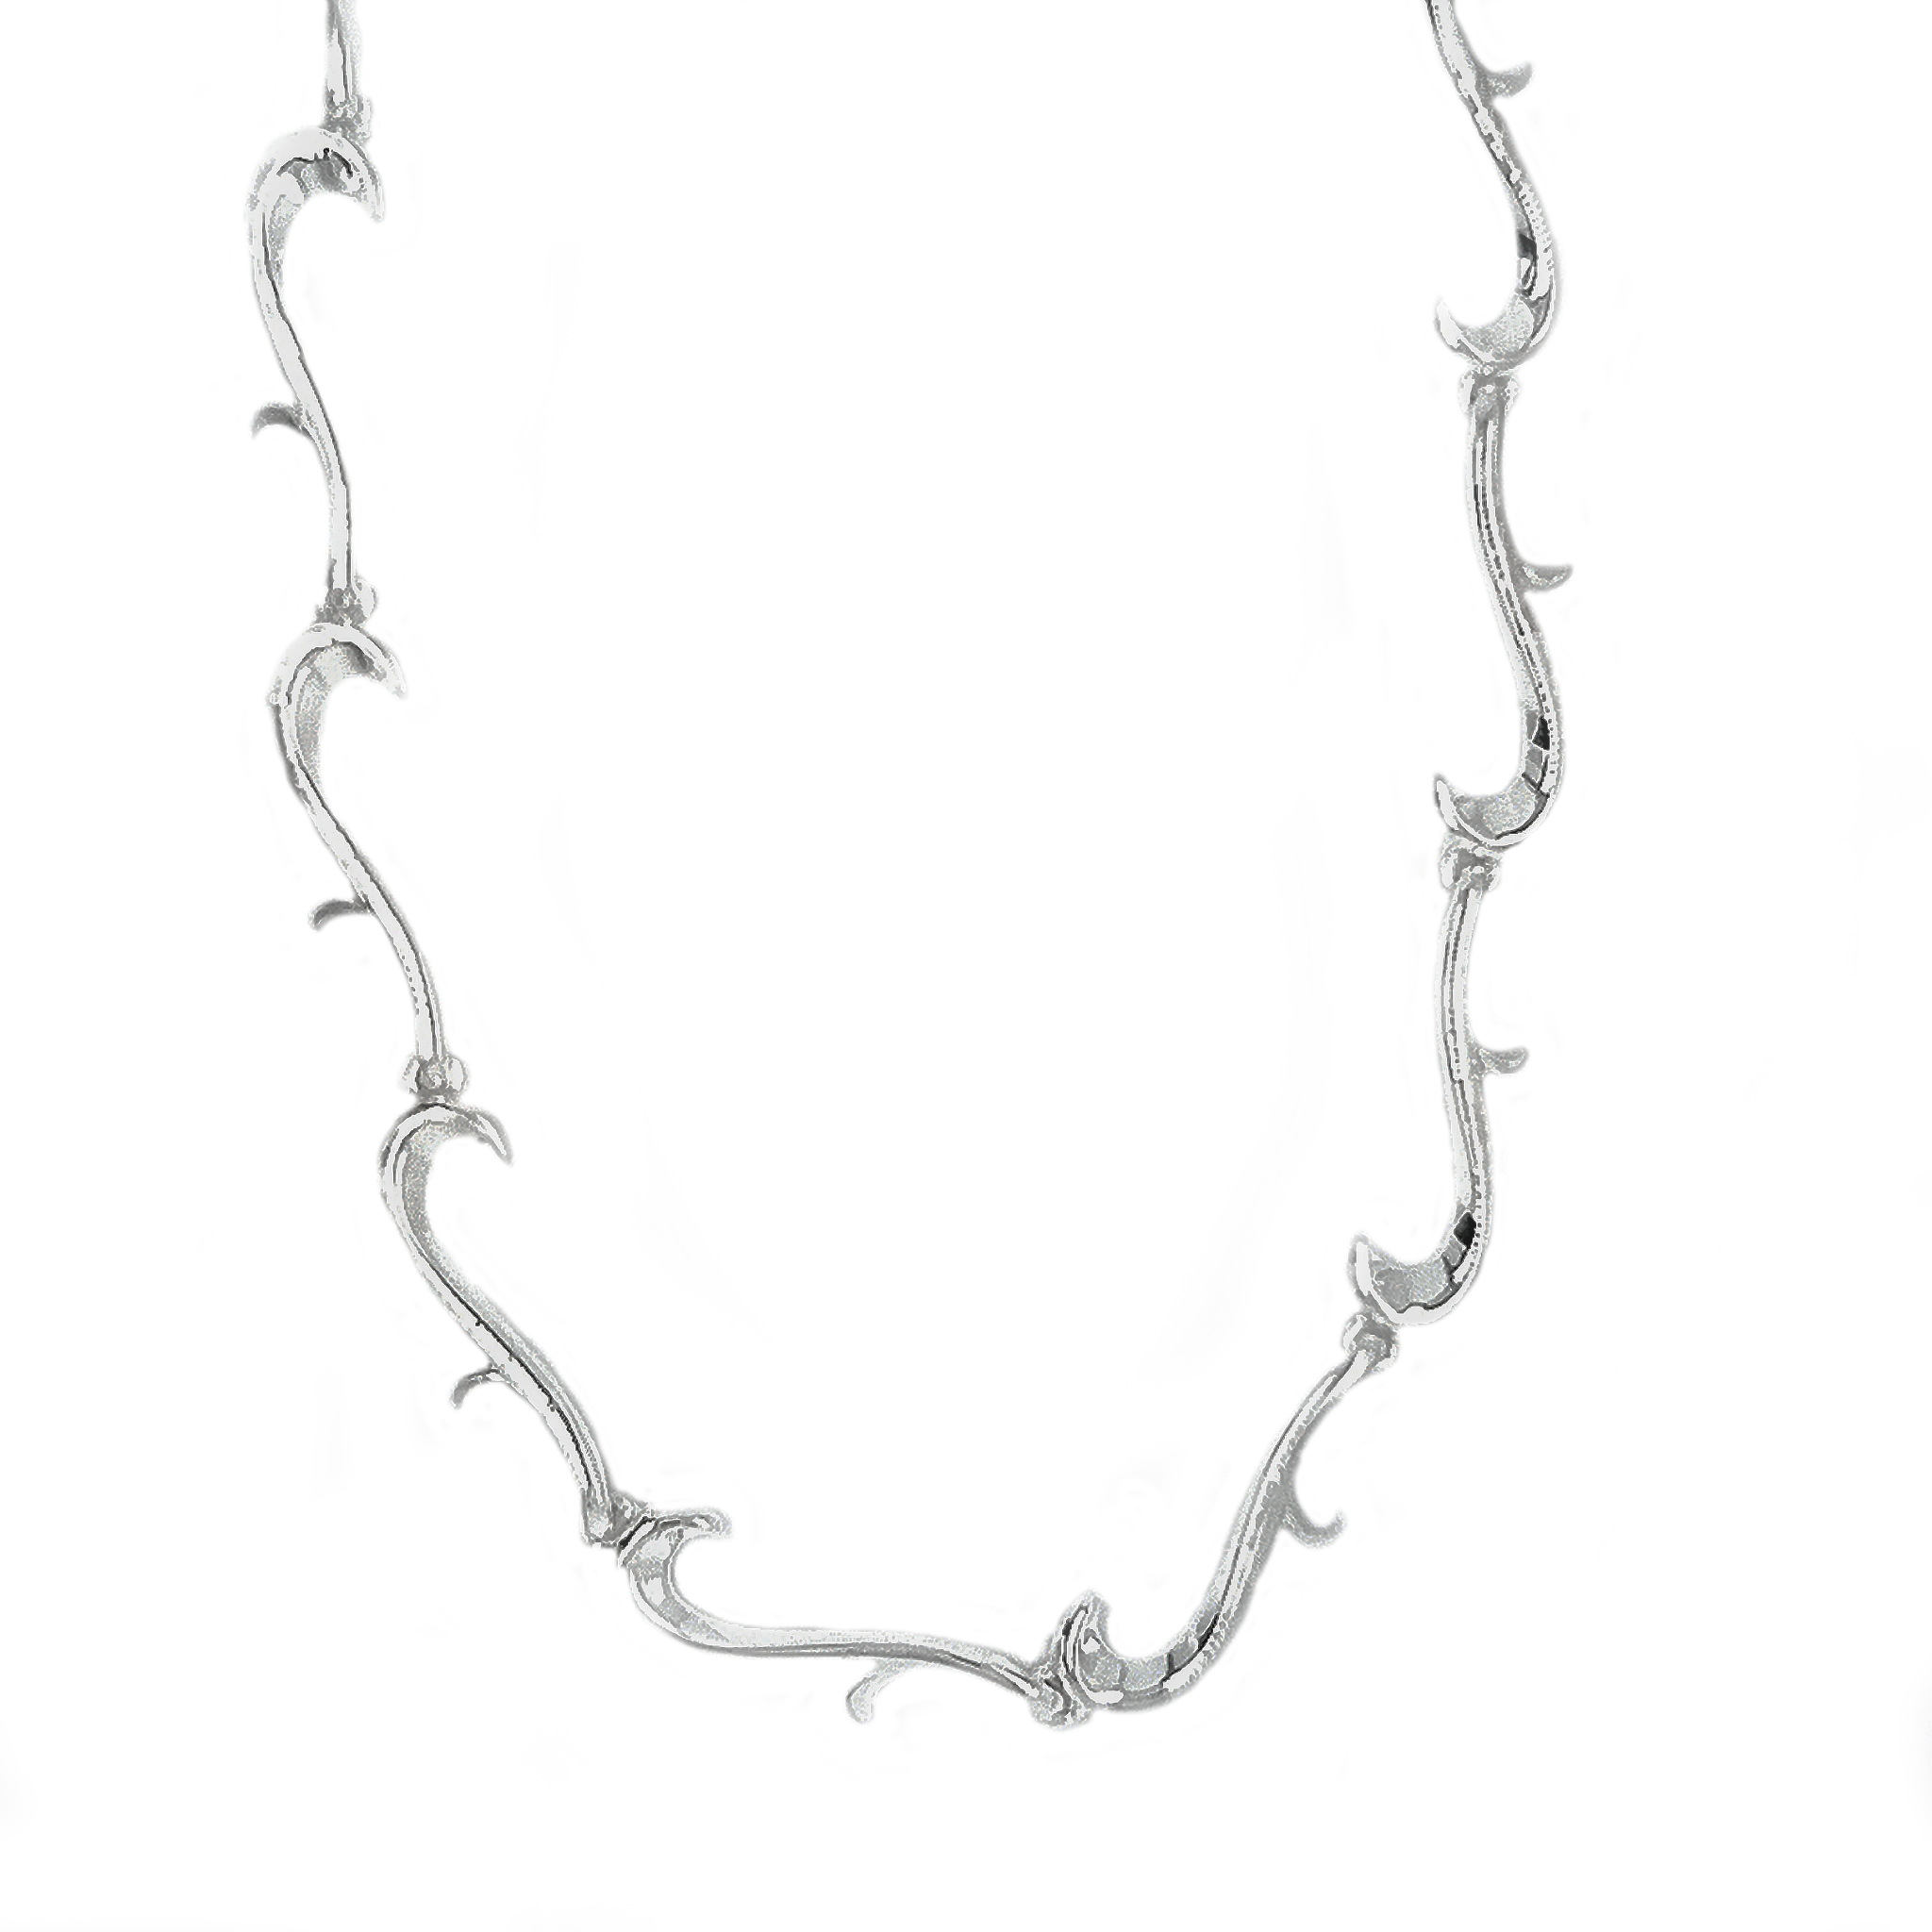 Silver Polished Tendril Link Necklace